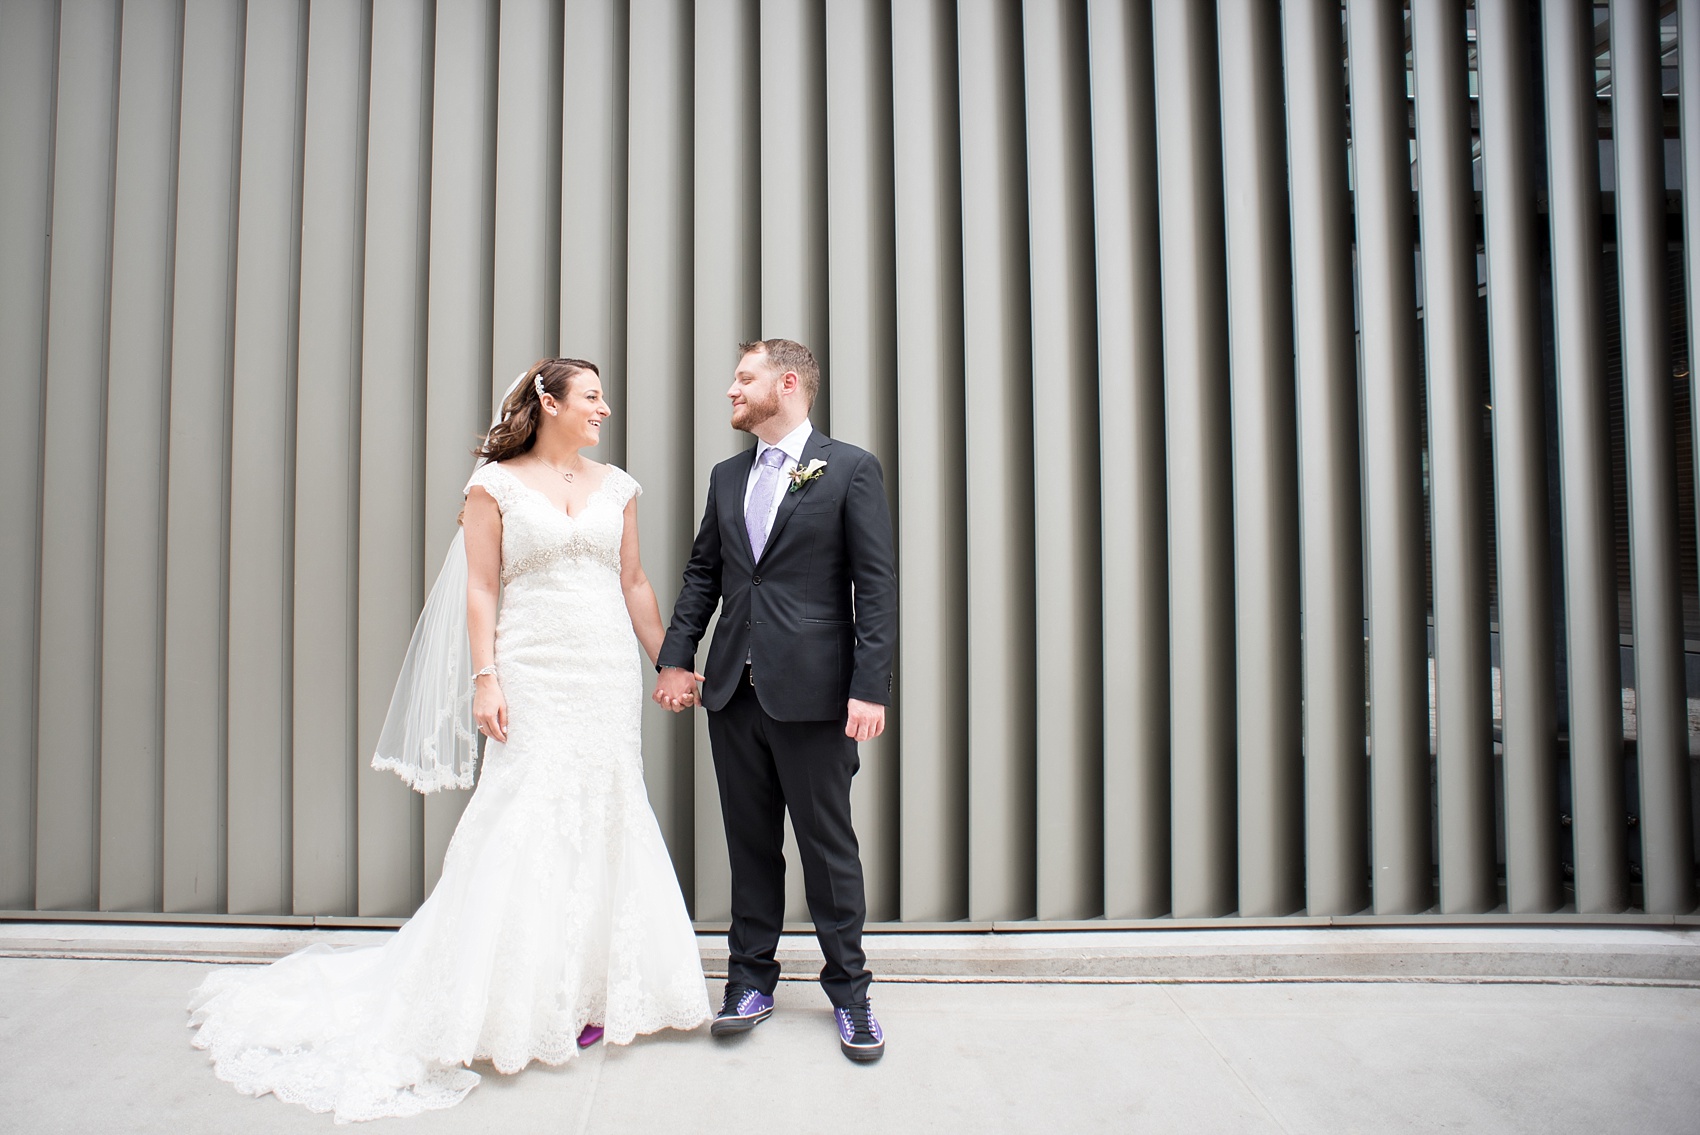 Mikkel Paige Photography photos of a NYC wedding at Tribeca Rooftop. The bride bride and groom in an urban image on the streets of lower Manhattan.